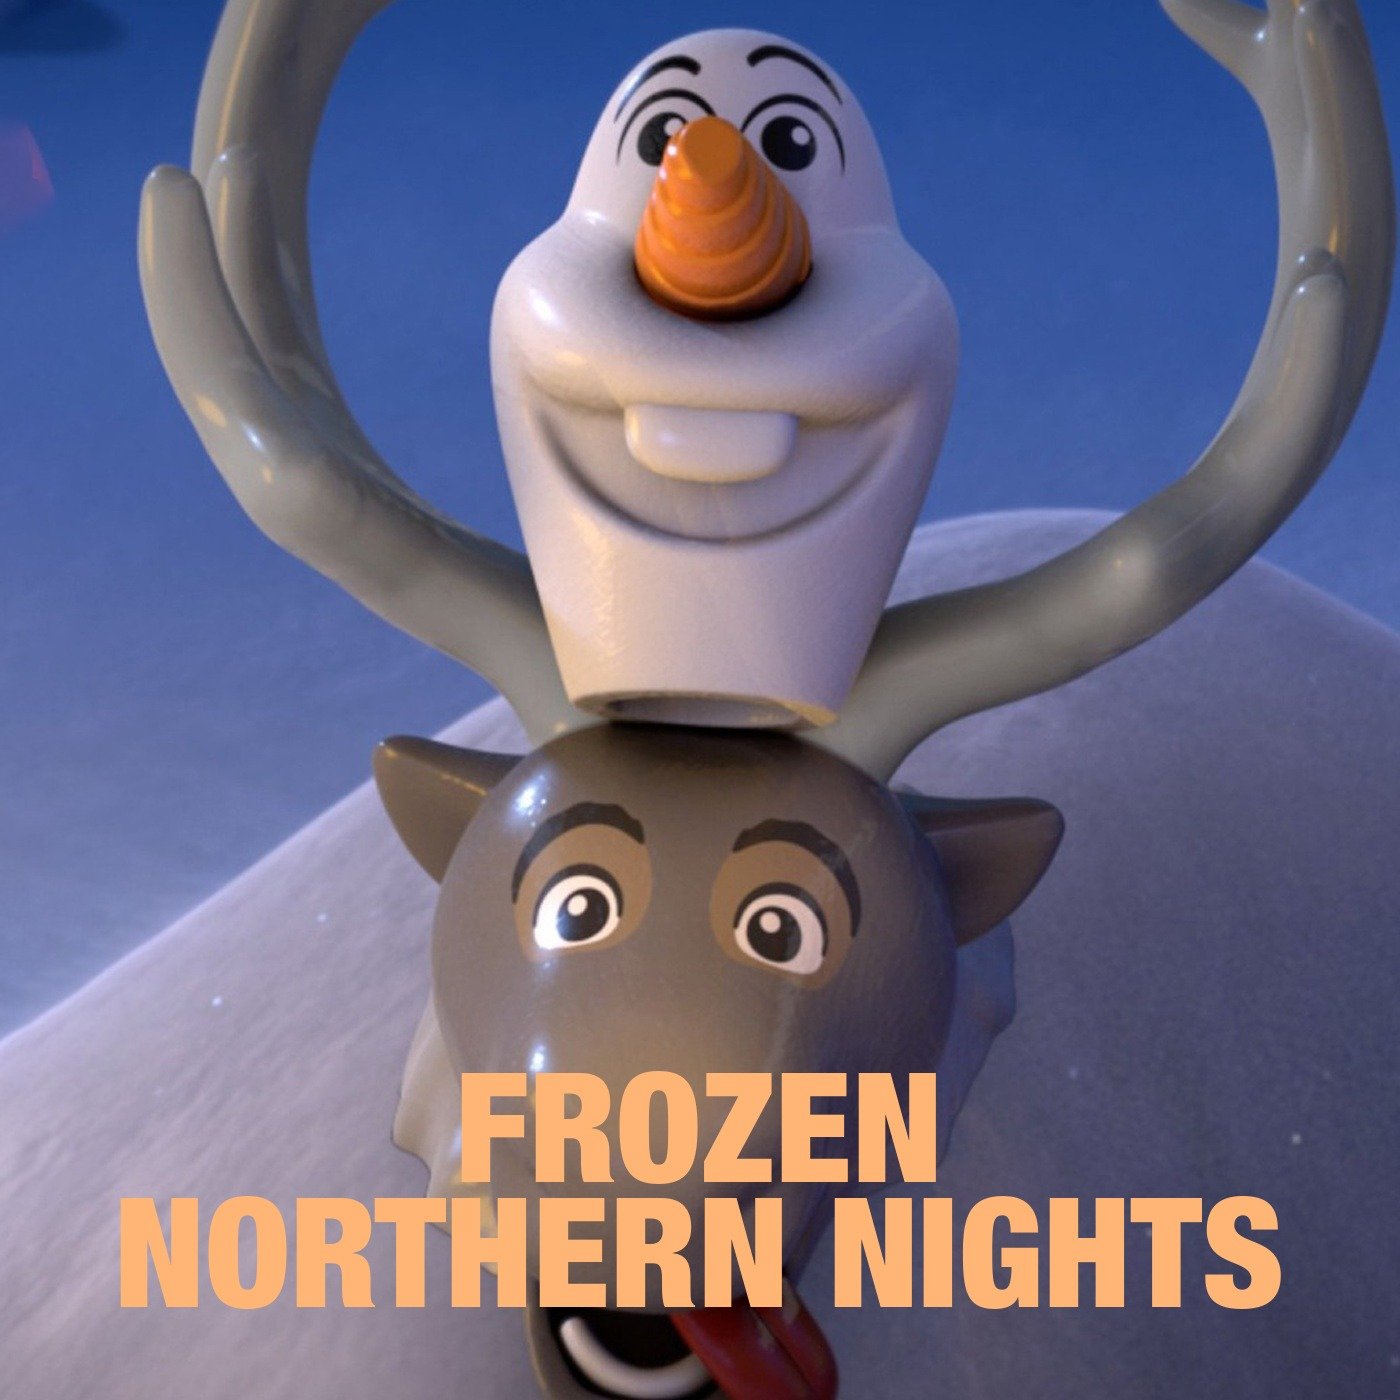 24 Facts About Olaf (Lego Frozen Northern Lights) - Facts.net